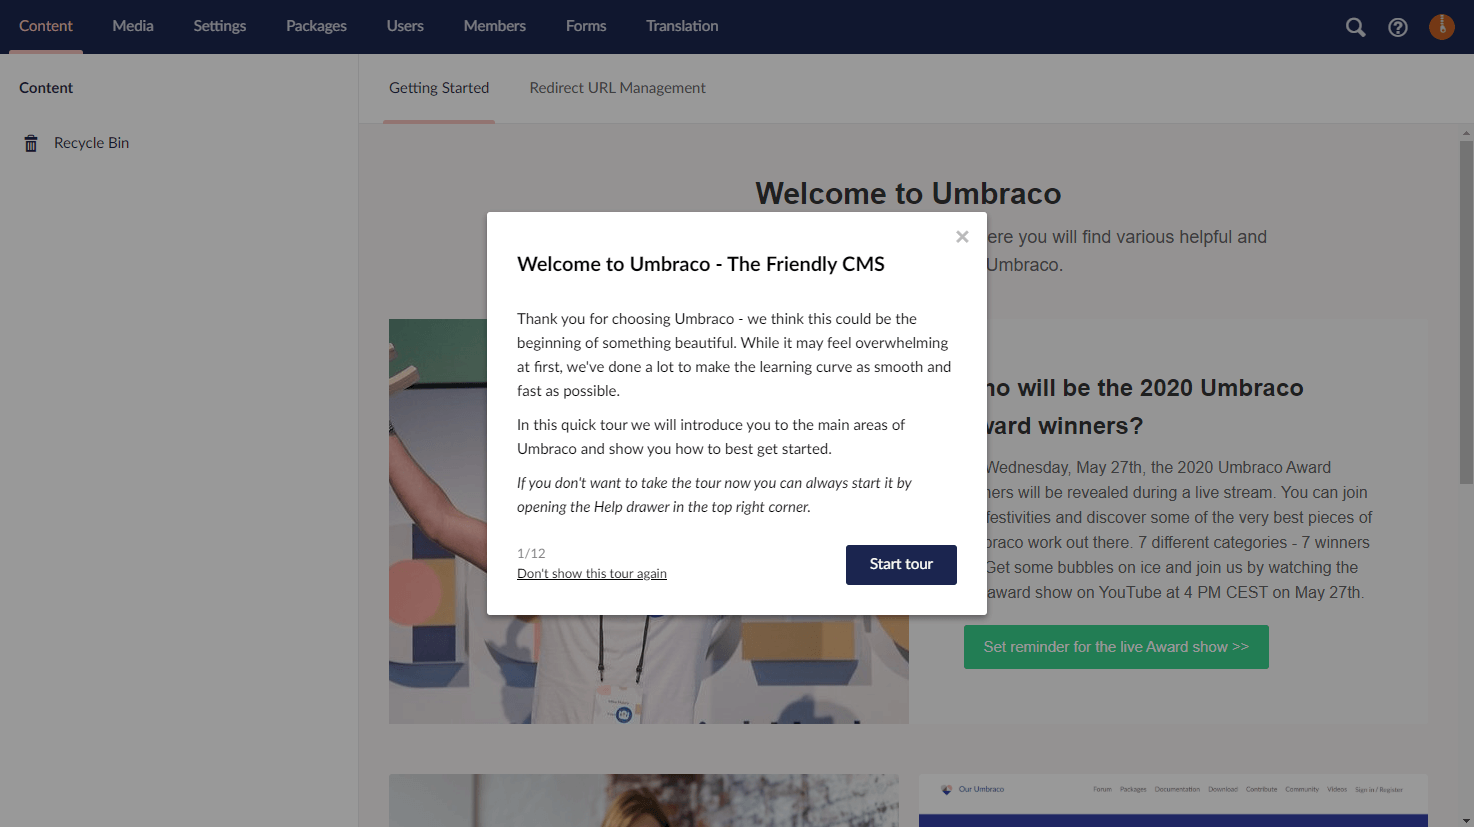 Umbraco CMS has successfully installed.